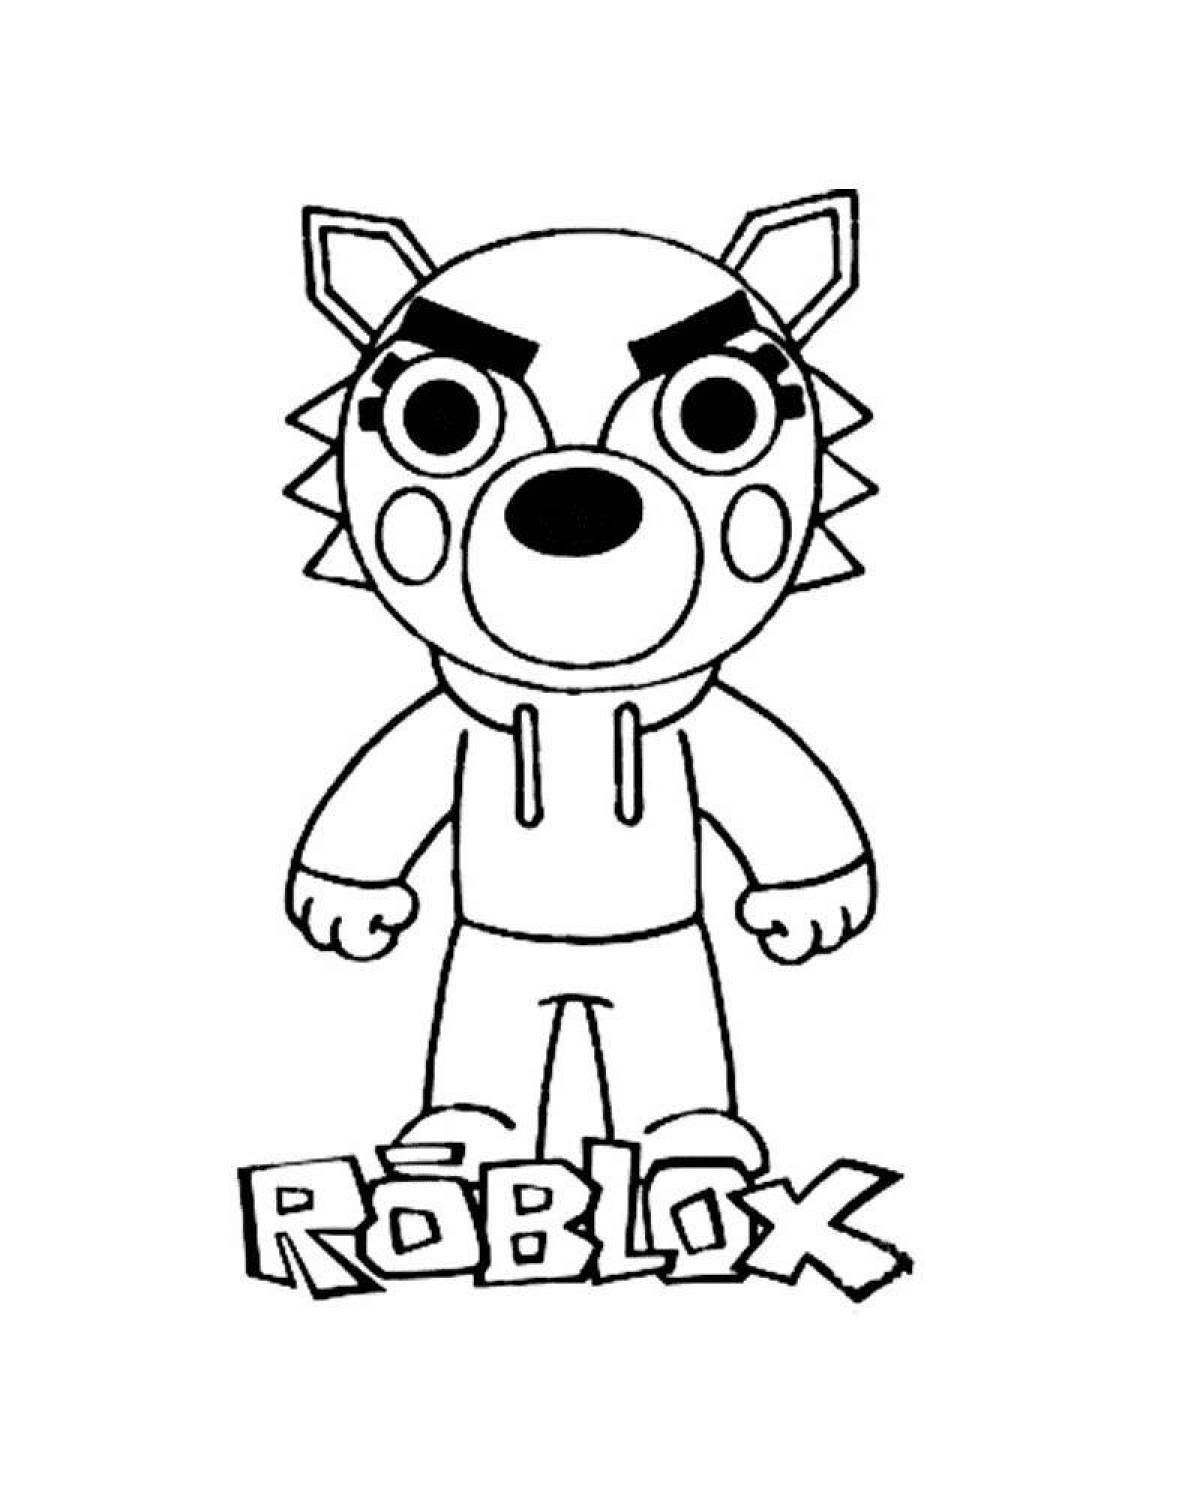 Baby eva roblox awesome coloring book